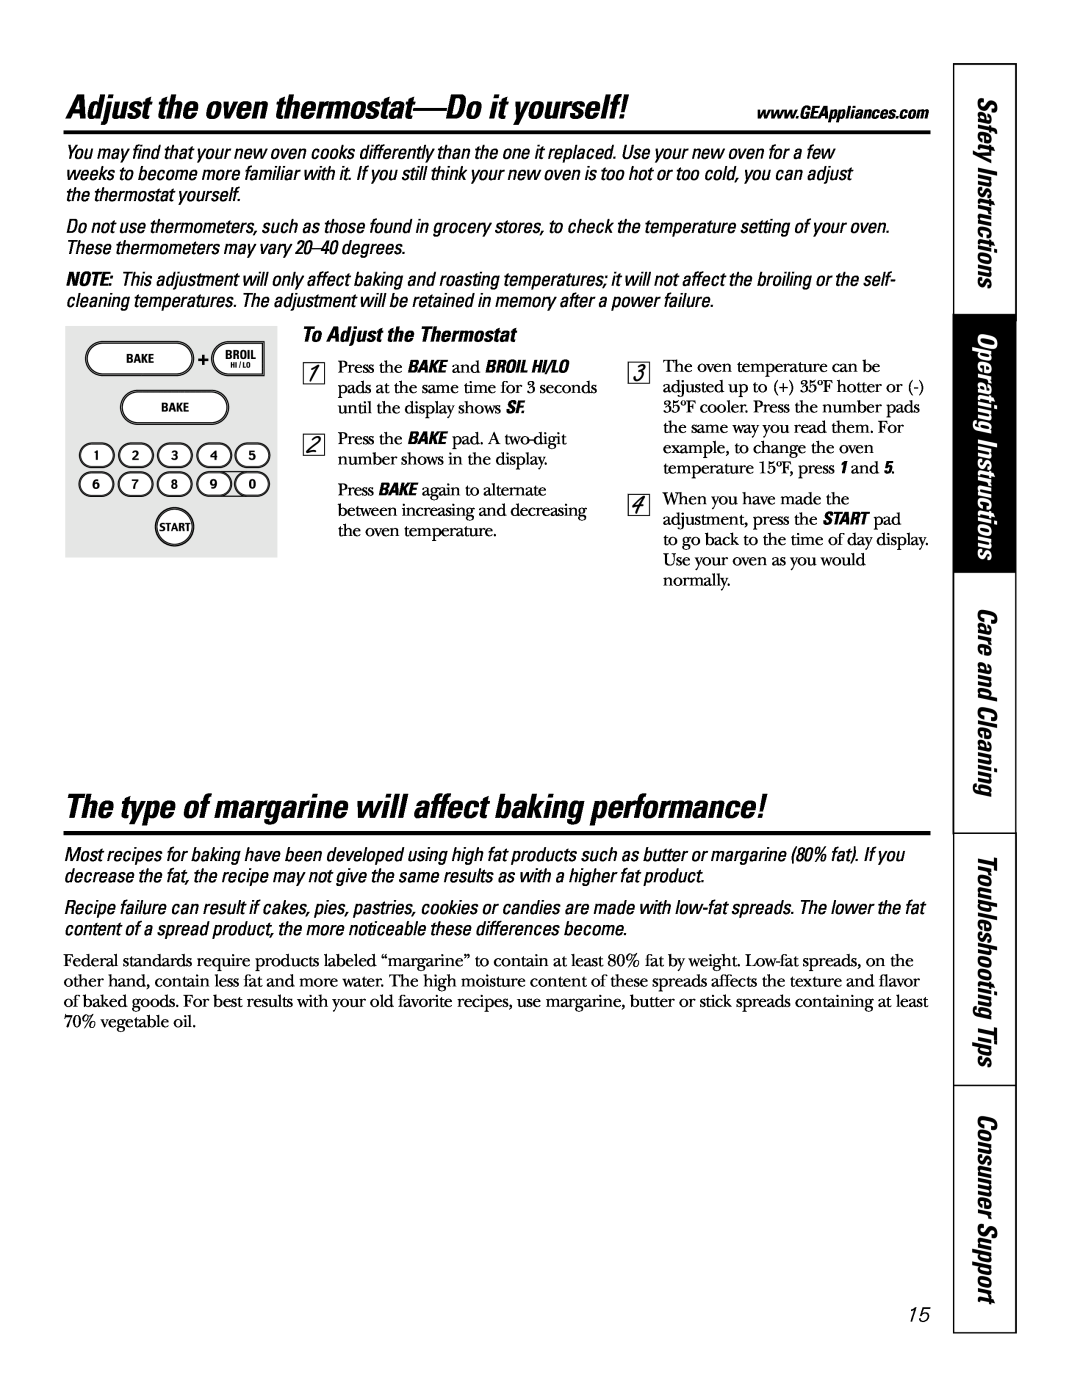 GE JDP47 owner manual Adjust the oven thermostat-Do it yourself, The type of margarine will affect baking performance 